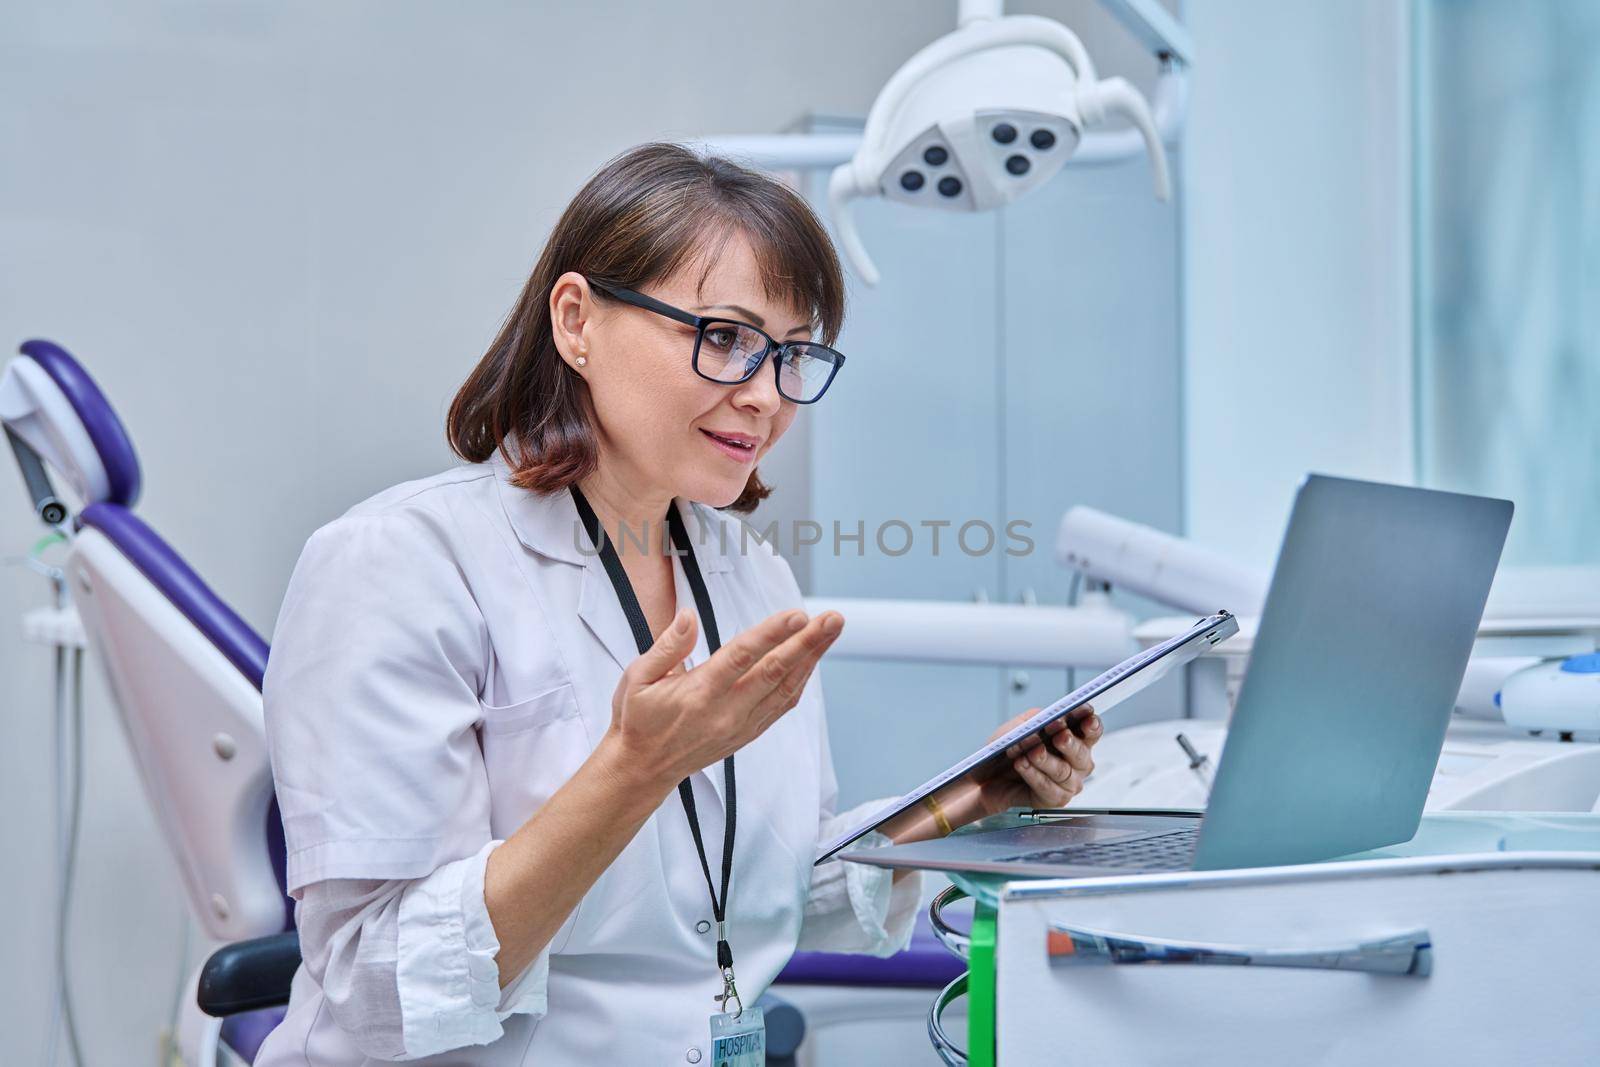 Doctor dentist working in office, using laptop clipboard, making video call conference, talking consulting patients online. Technology, medicine, dentistry, dental health care concept